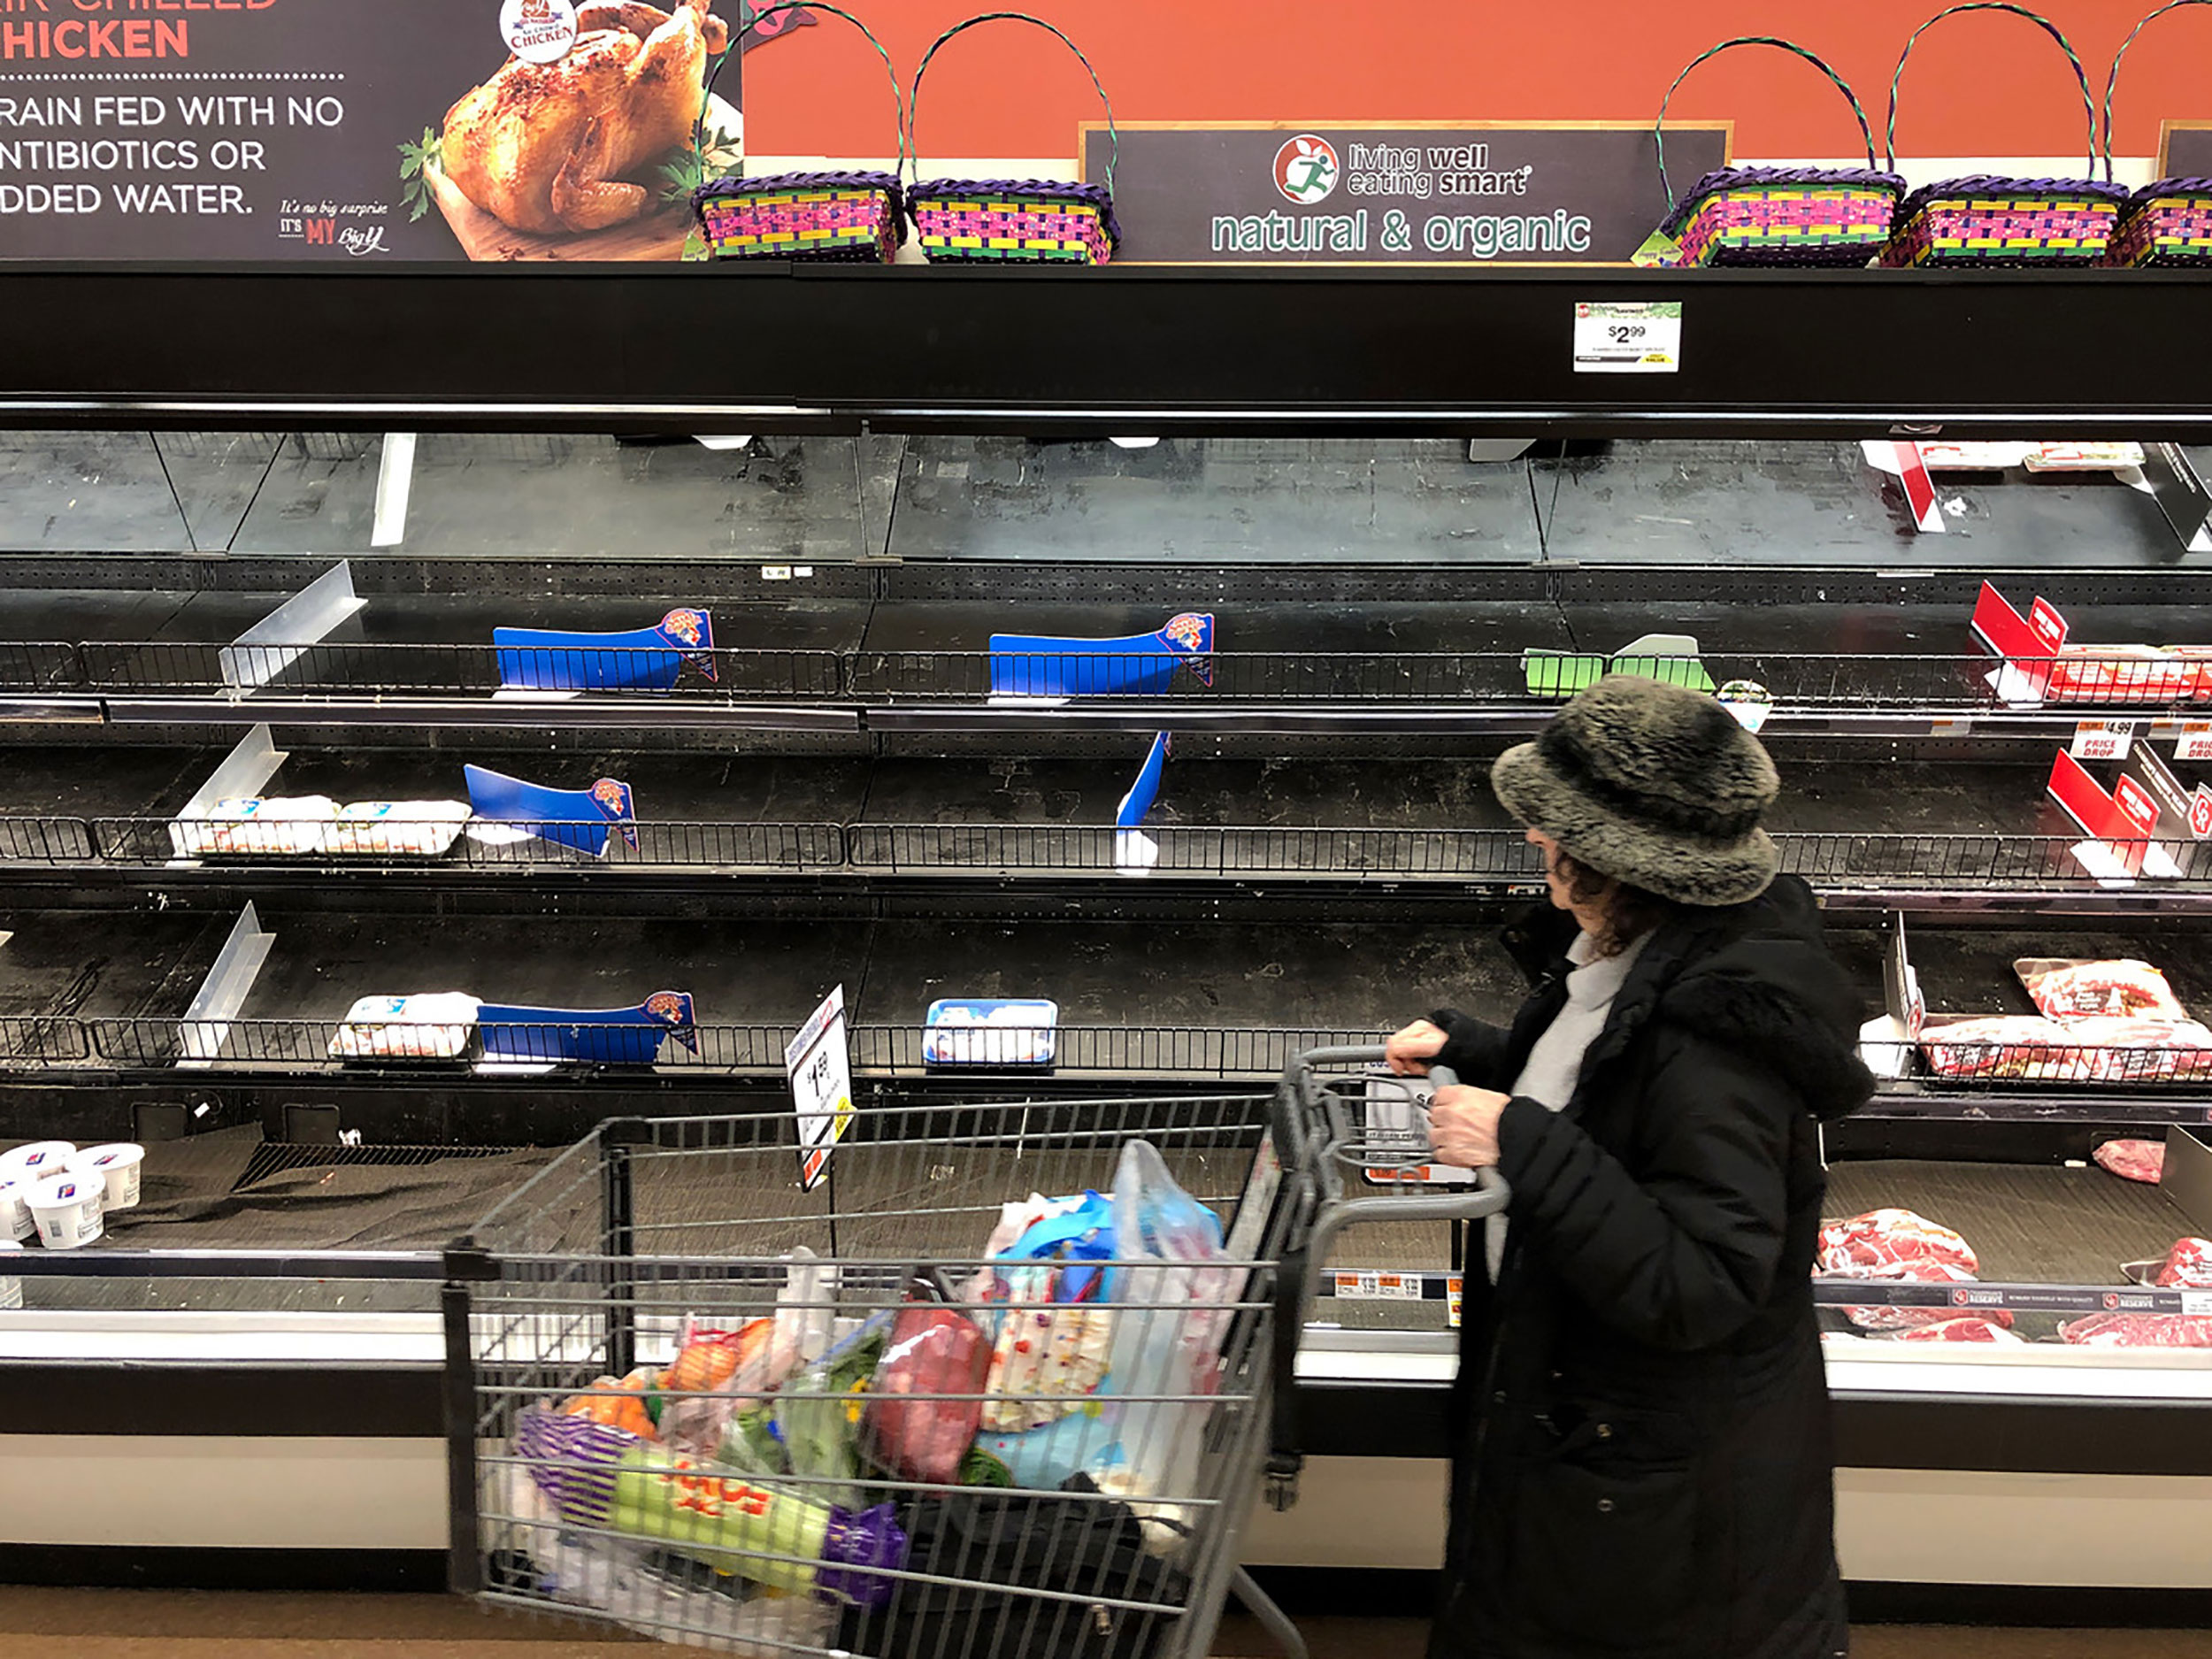 A person walks past empty shelves at a supermarket in Saugus, Massachusetts, on March 13.